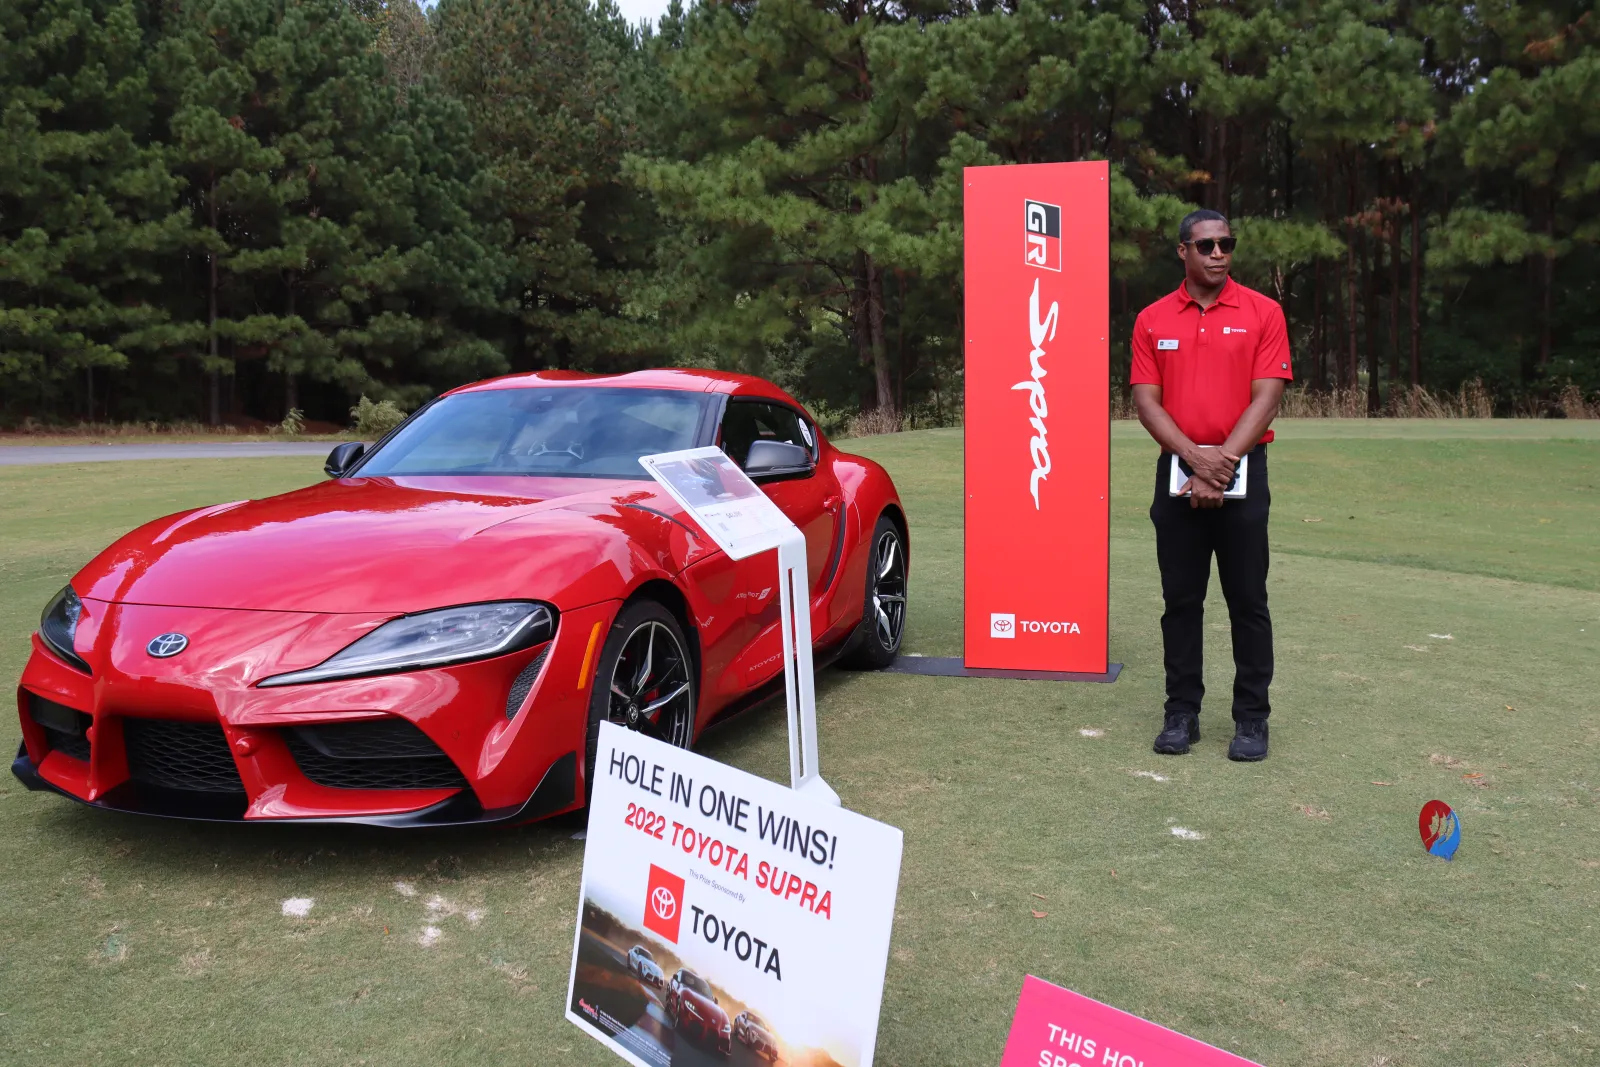 a person standing next to a red sports car